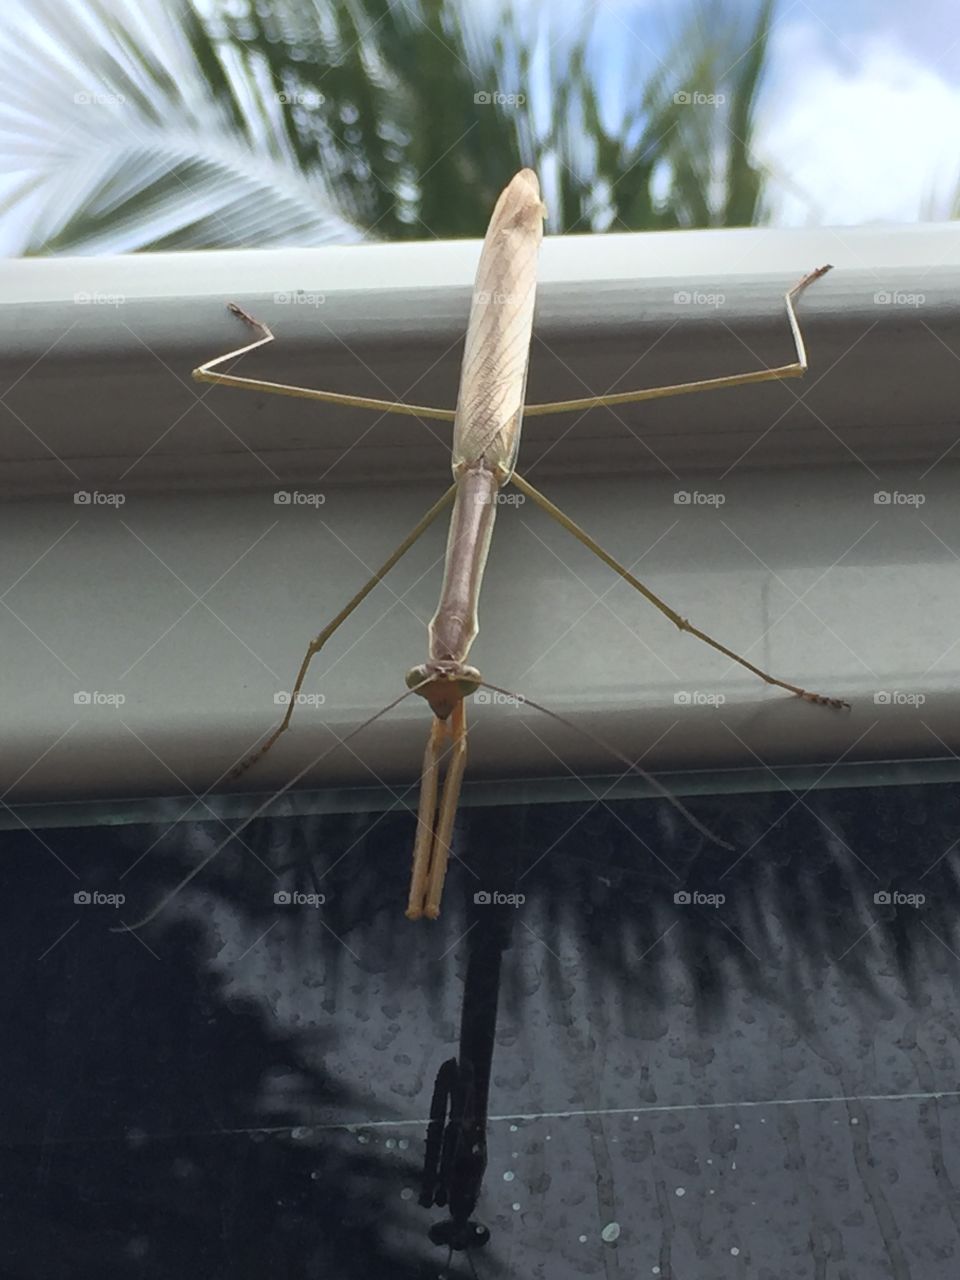 Grasshopper on back of my vehicle. Relaxation😊